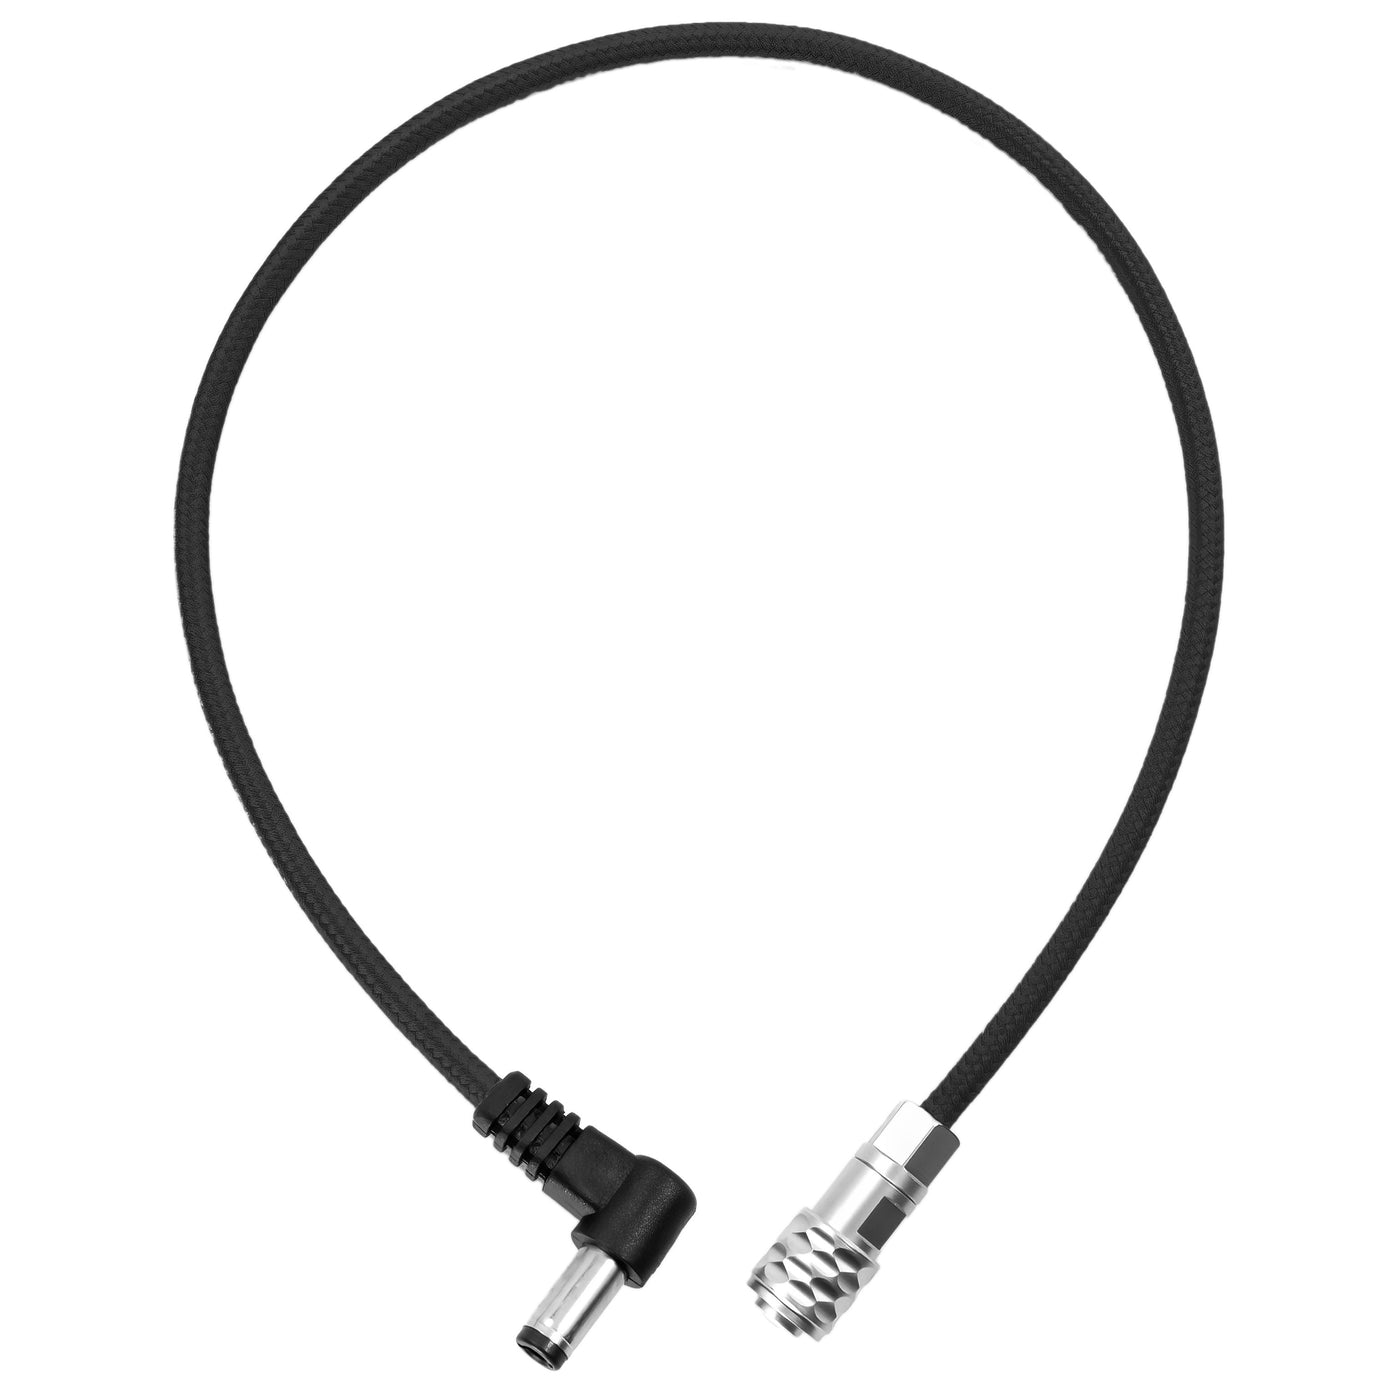 14" Male DC 5.5/2.5 to BMPCC 4K/6K Pro Power Cable